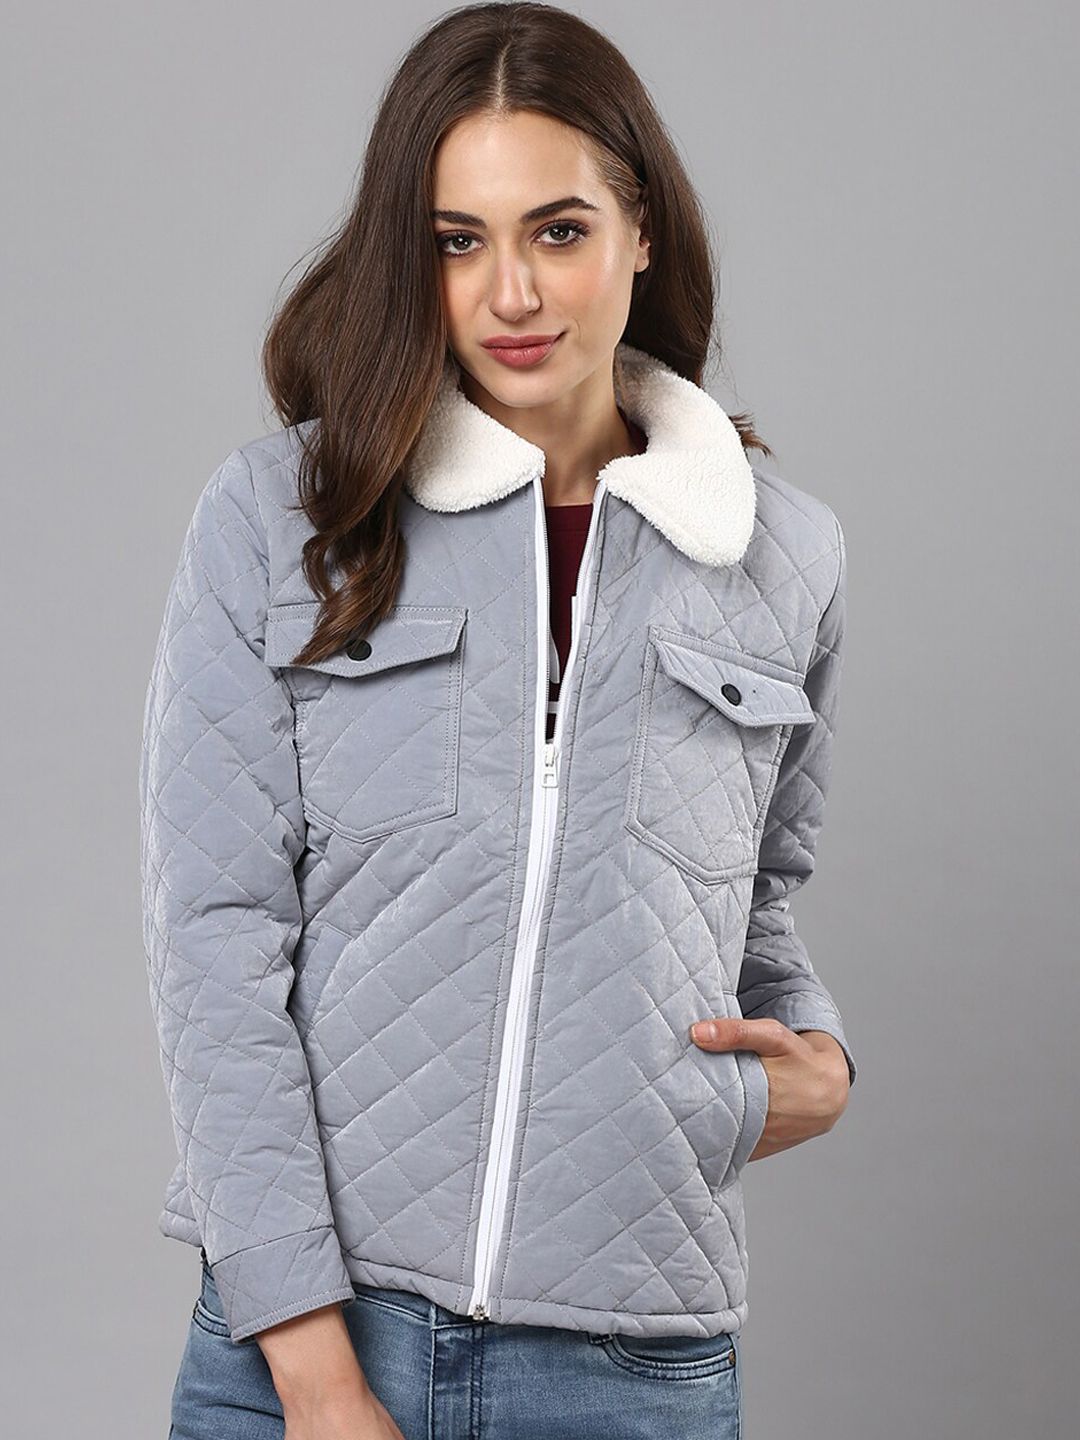 Campus Sutra Women Grey White Windcheater Quilted Jacket Price in India